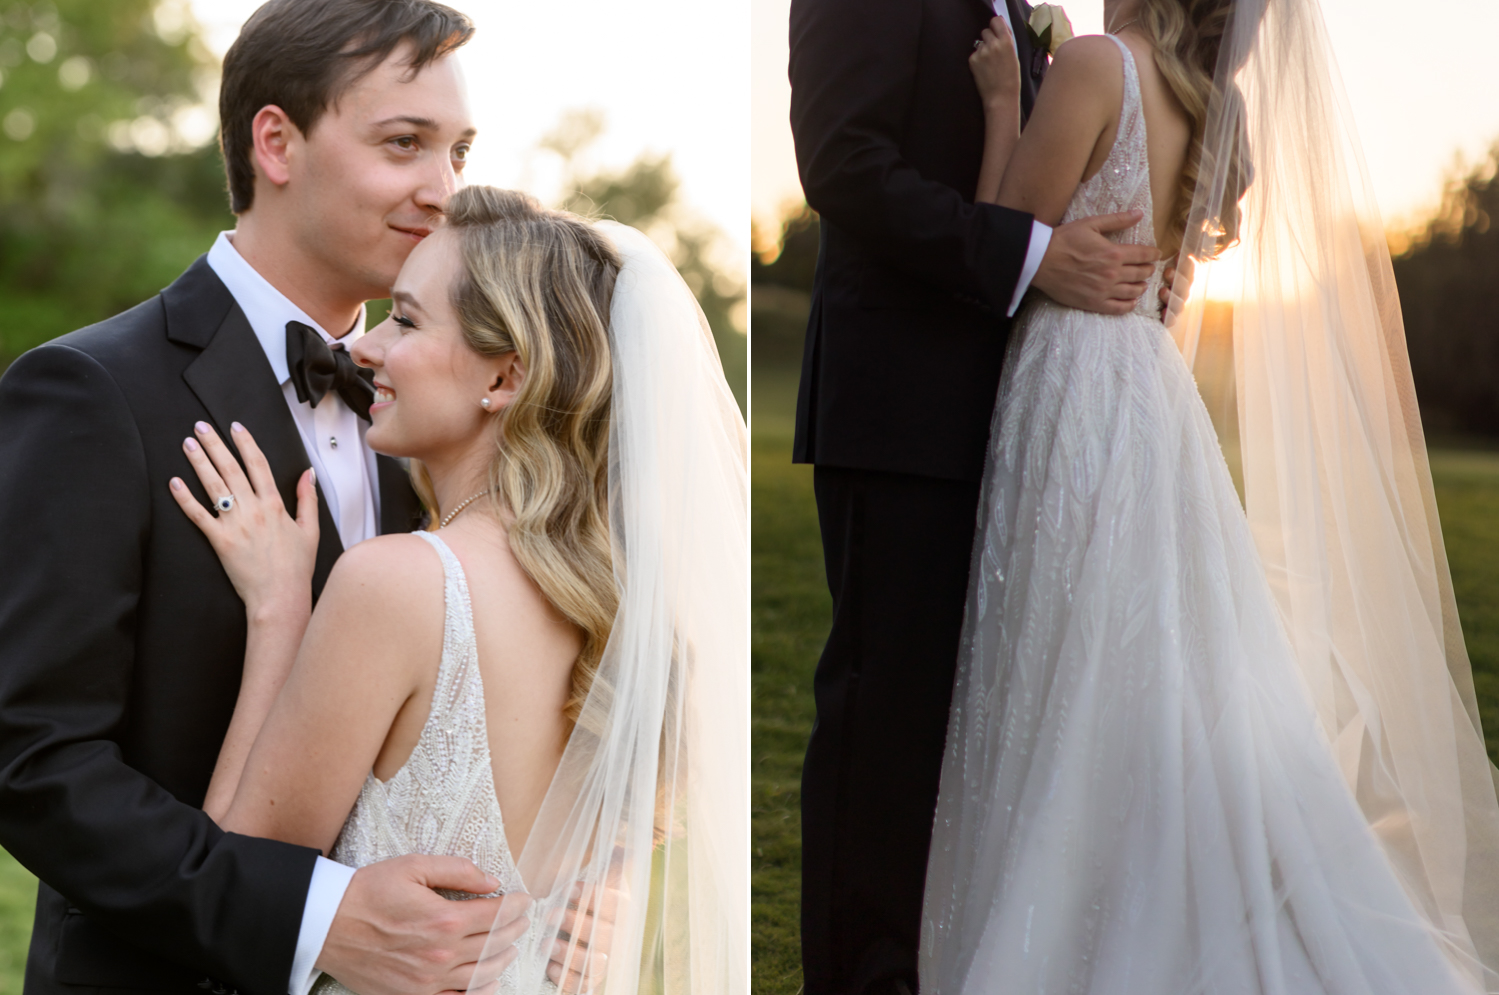 Left: The bride and groom embrace and smile. Right: The groom holds the bride as the sun sets in the background